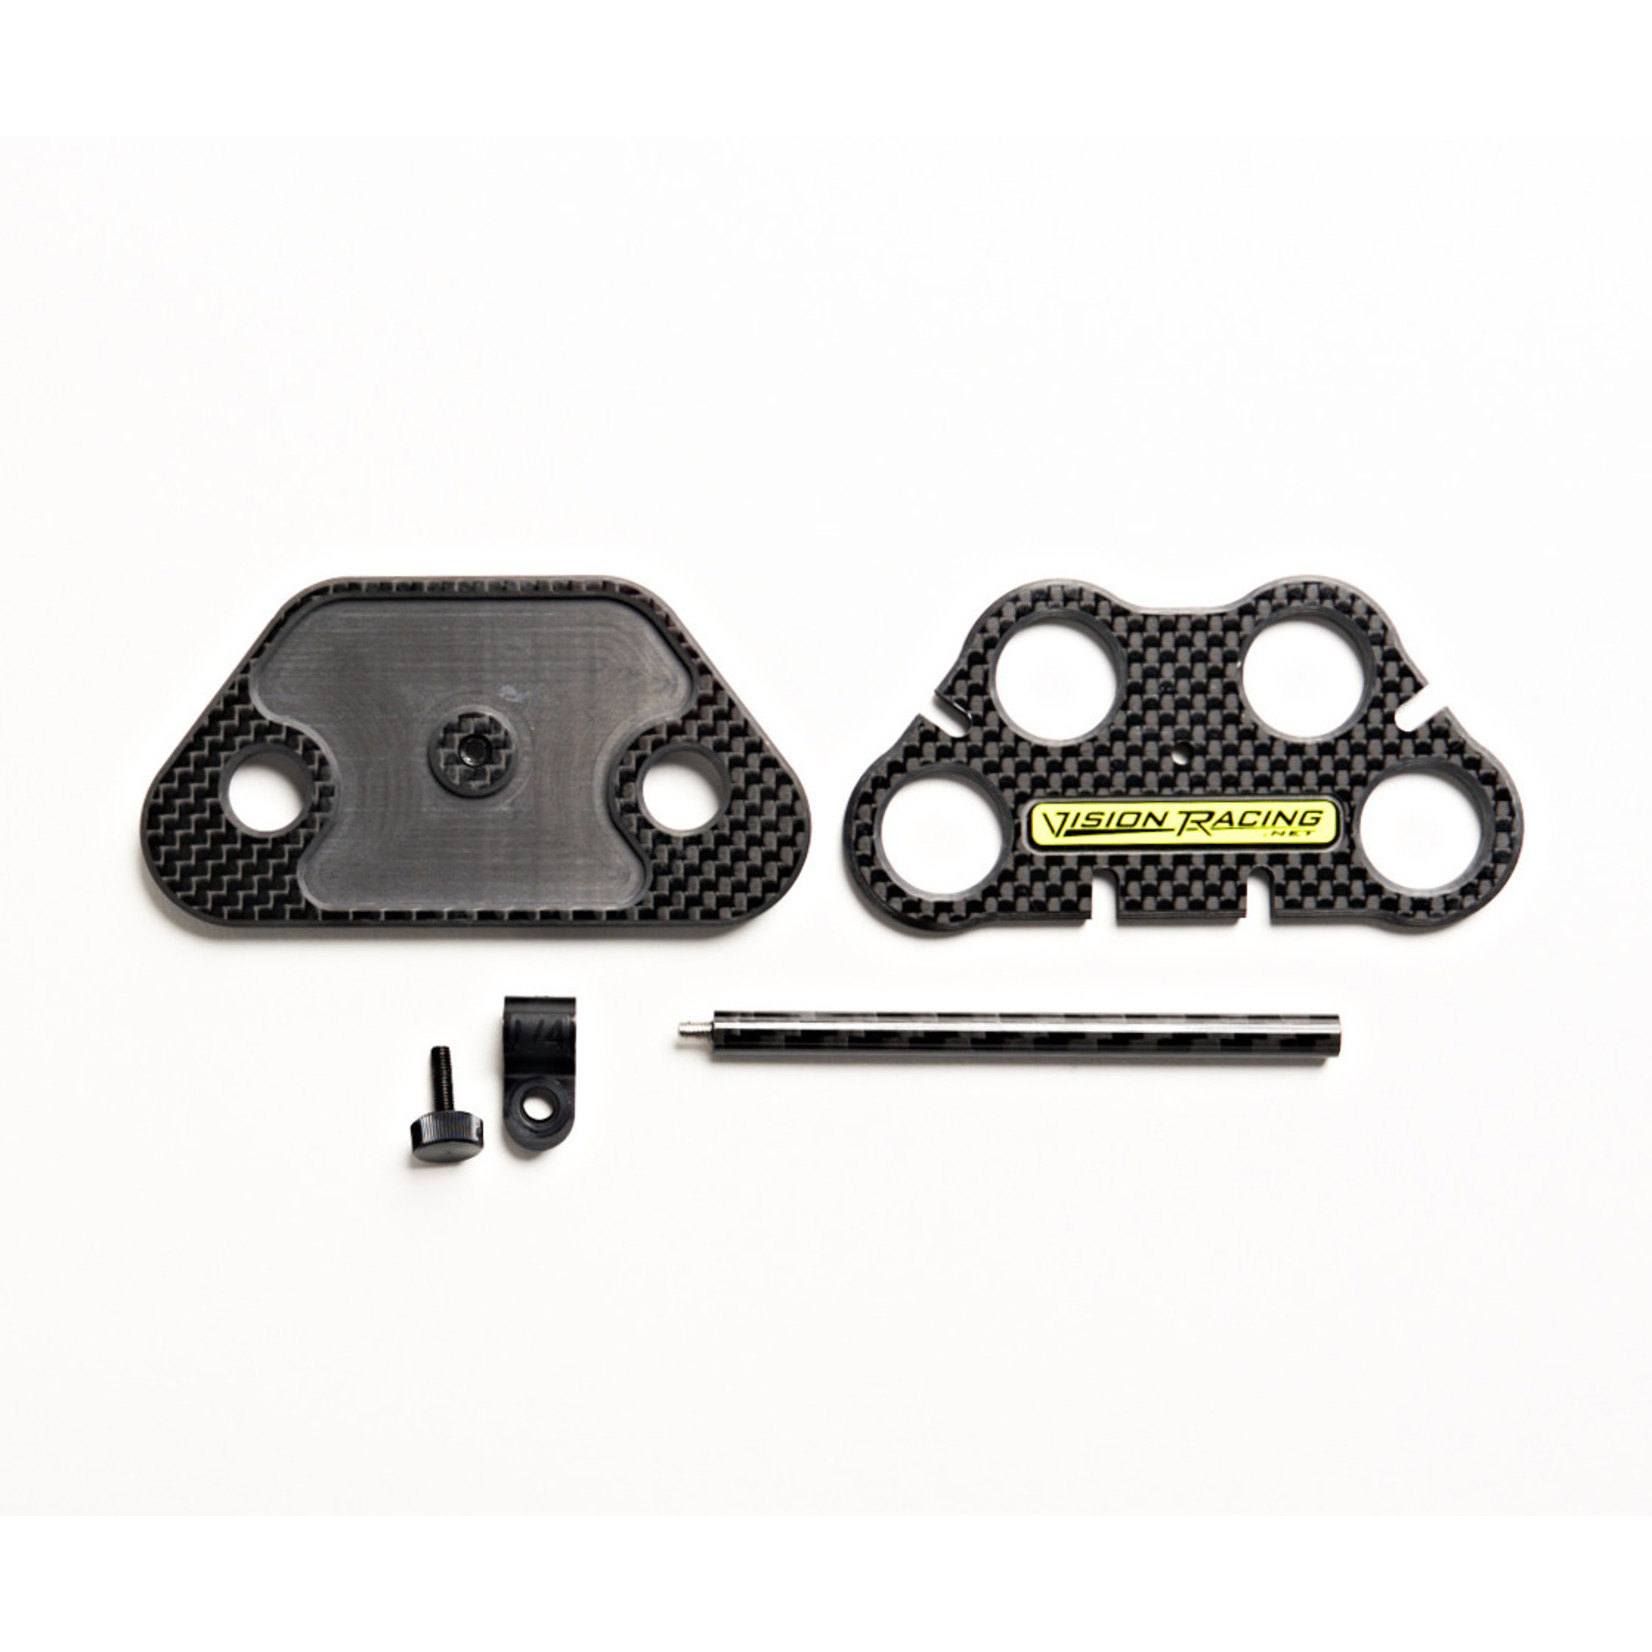 Vision Racing Vision Racing Carbon Fiber 1/10 Offroad Shock and Diff Stand #00134